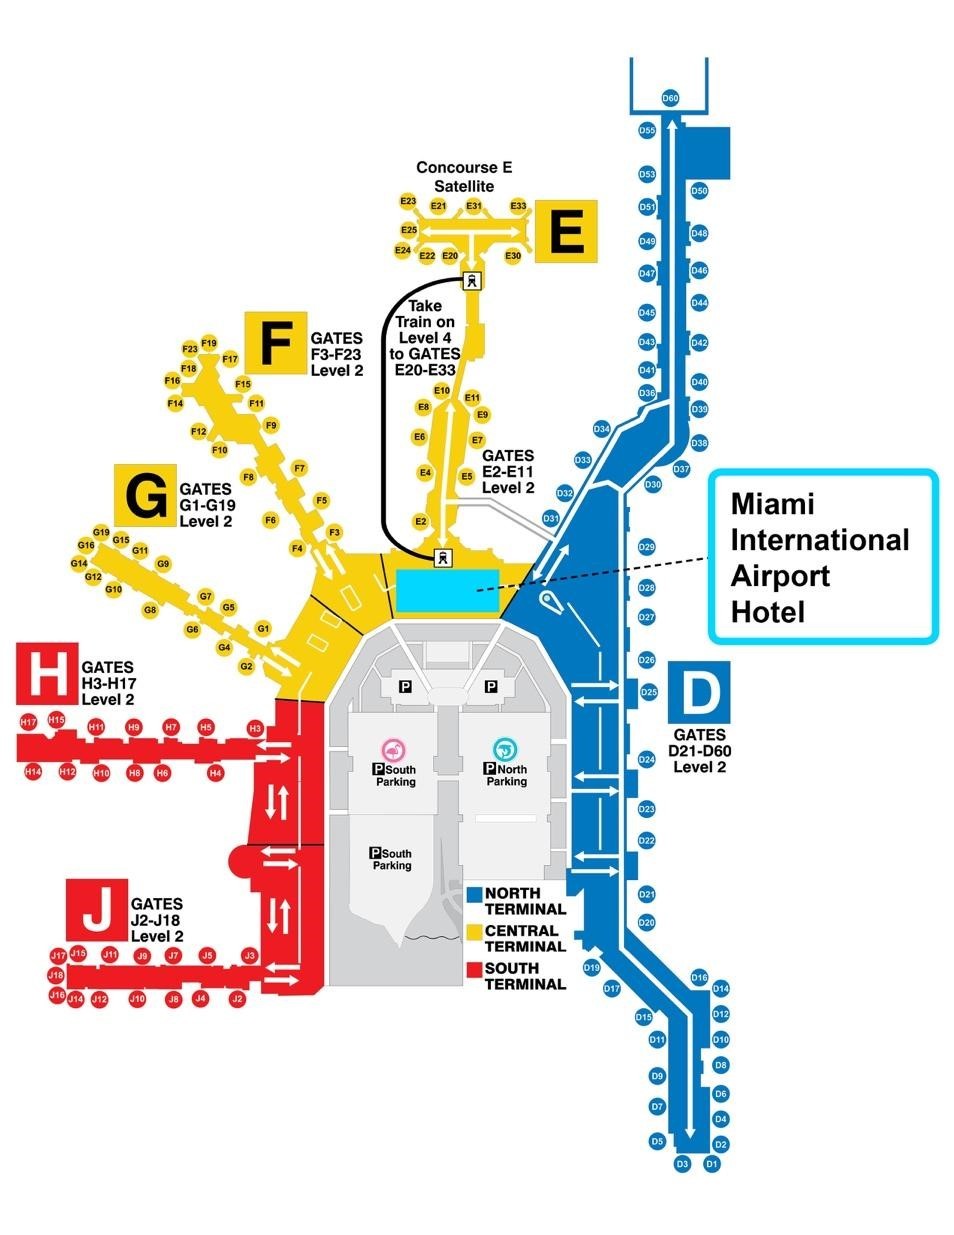 miami airport gate map Mcr Is Now Managing The Miami International Airport Hotel miami airport gate map